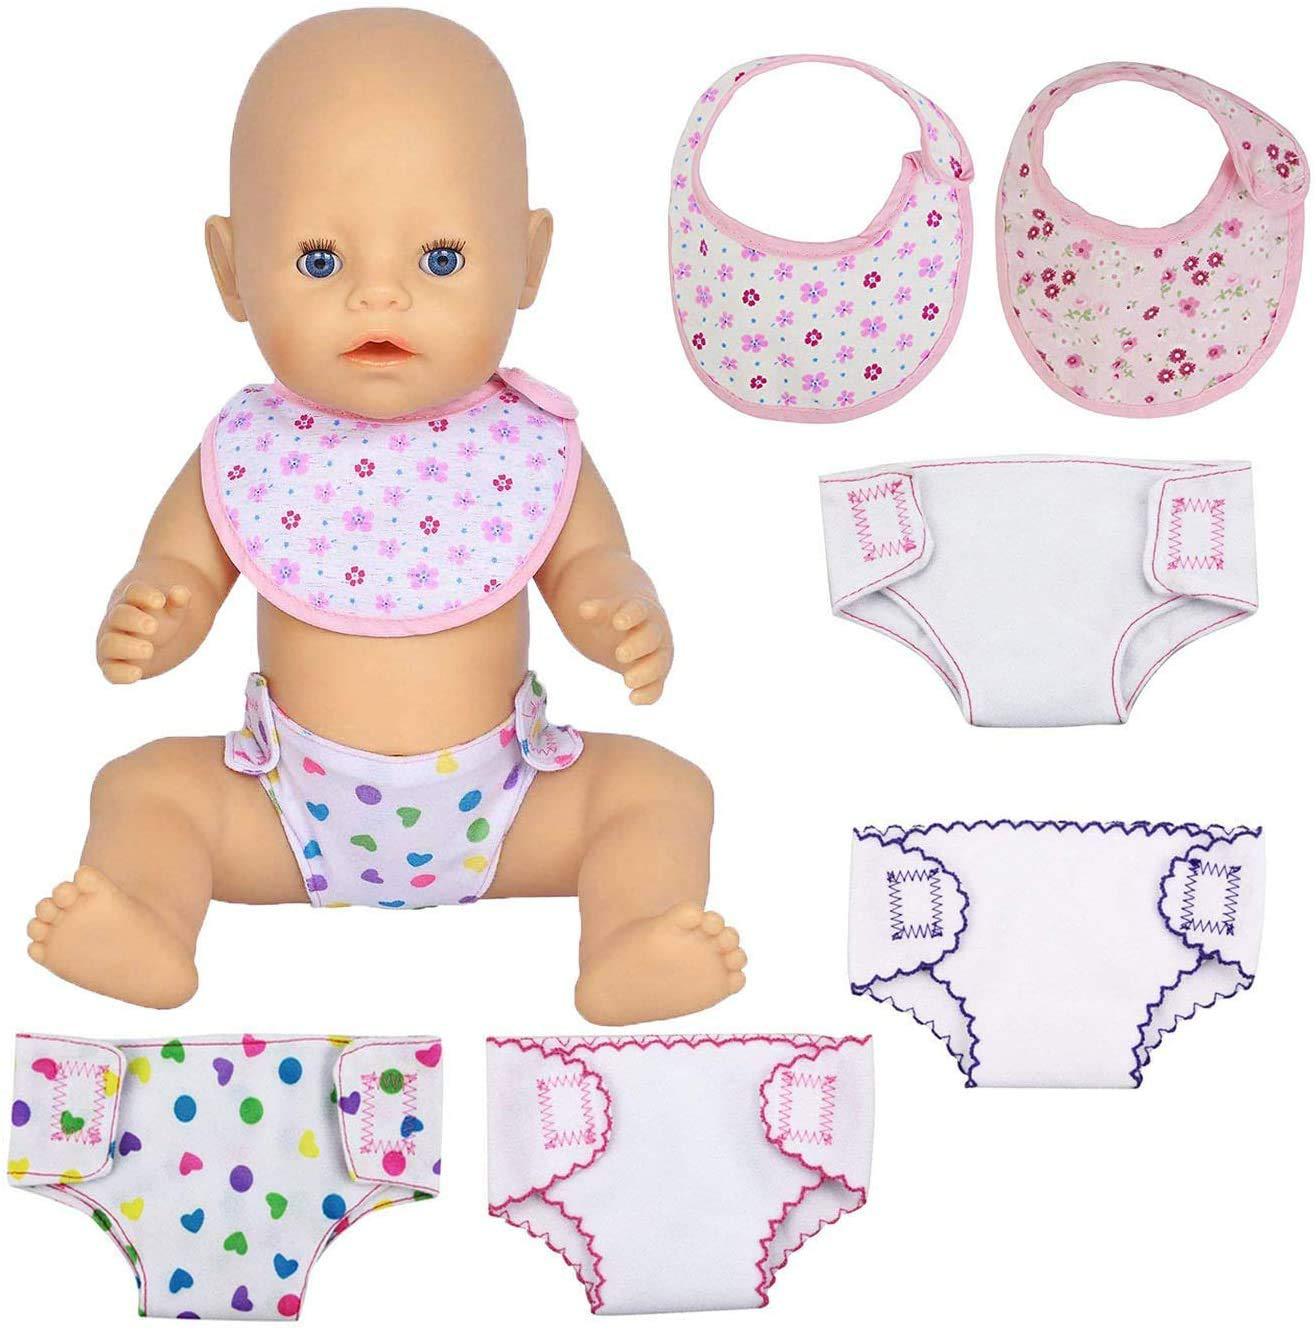 Famoby 4pcs baby doll diapers doll underwear and 2pcs doll bids for 14 to 18 inch doll, american girl doll baby alive girl birthday 